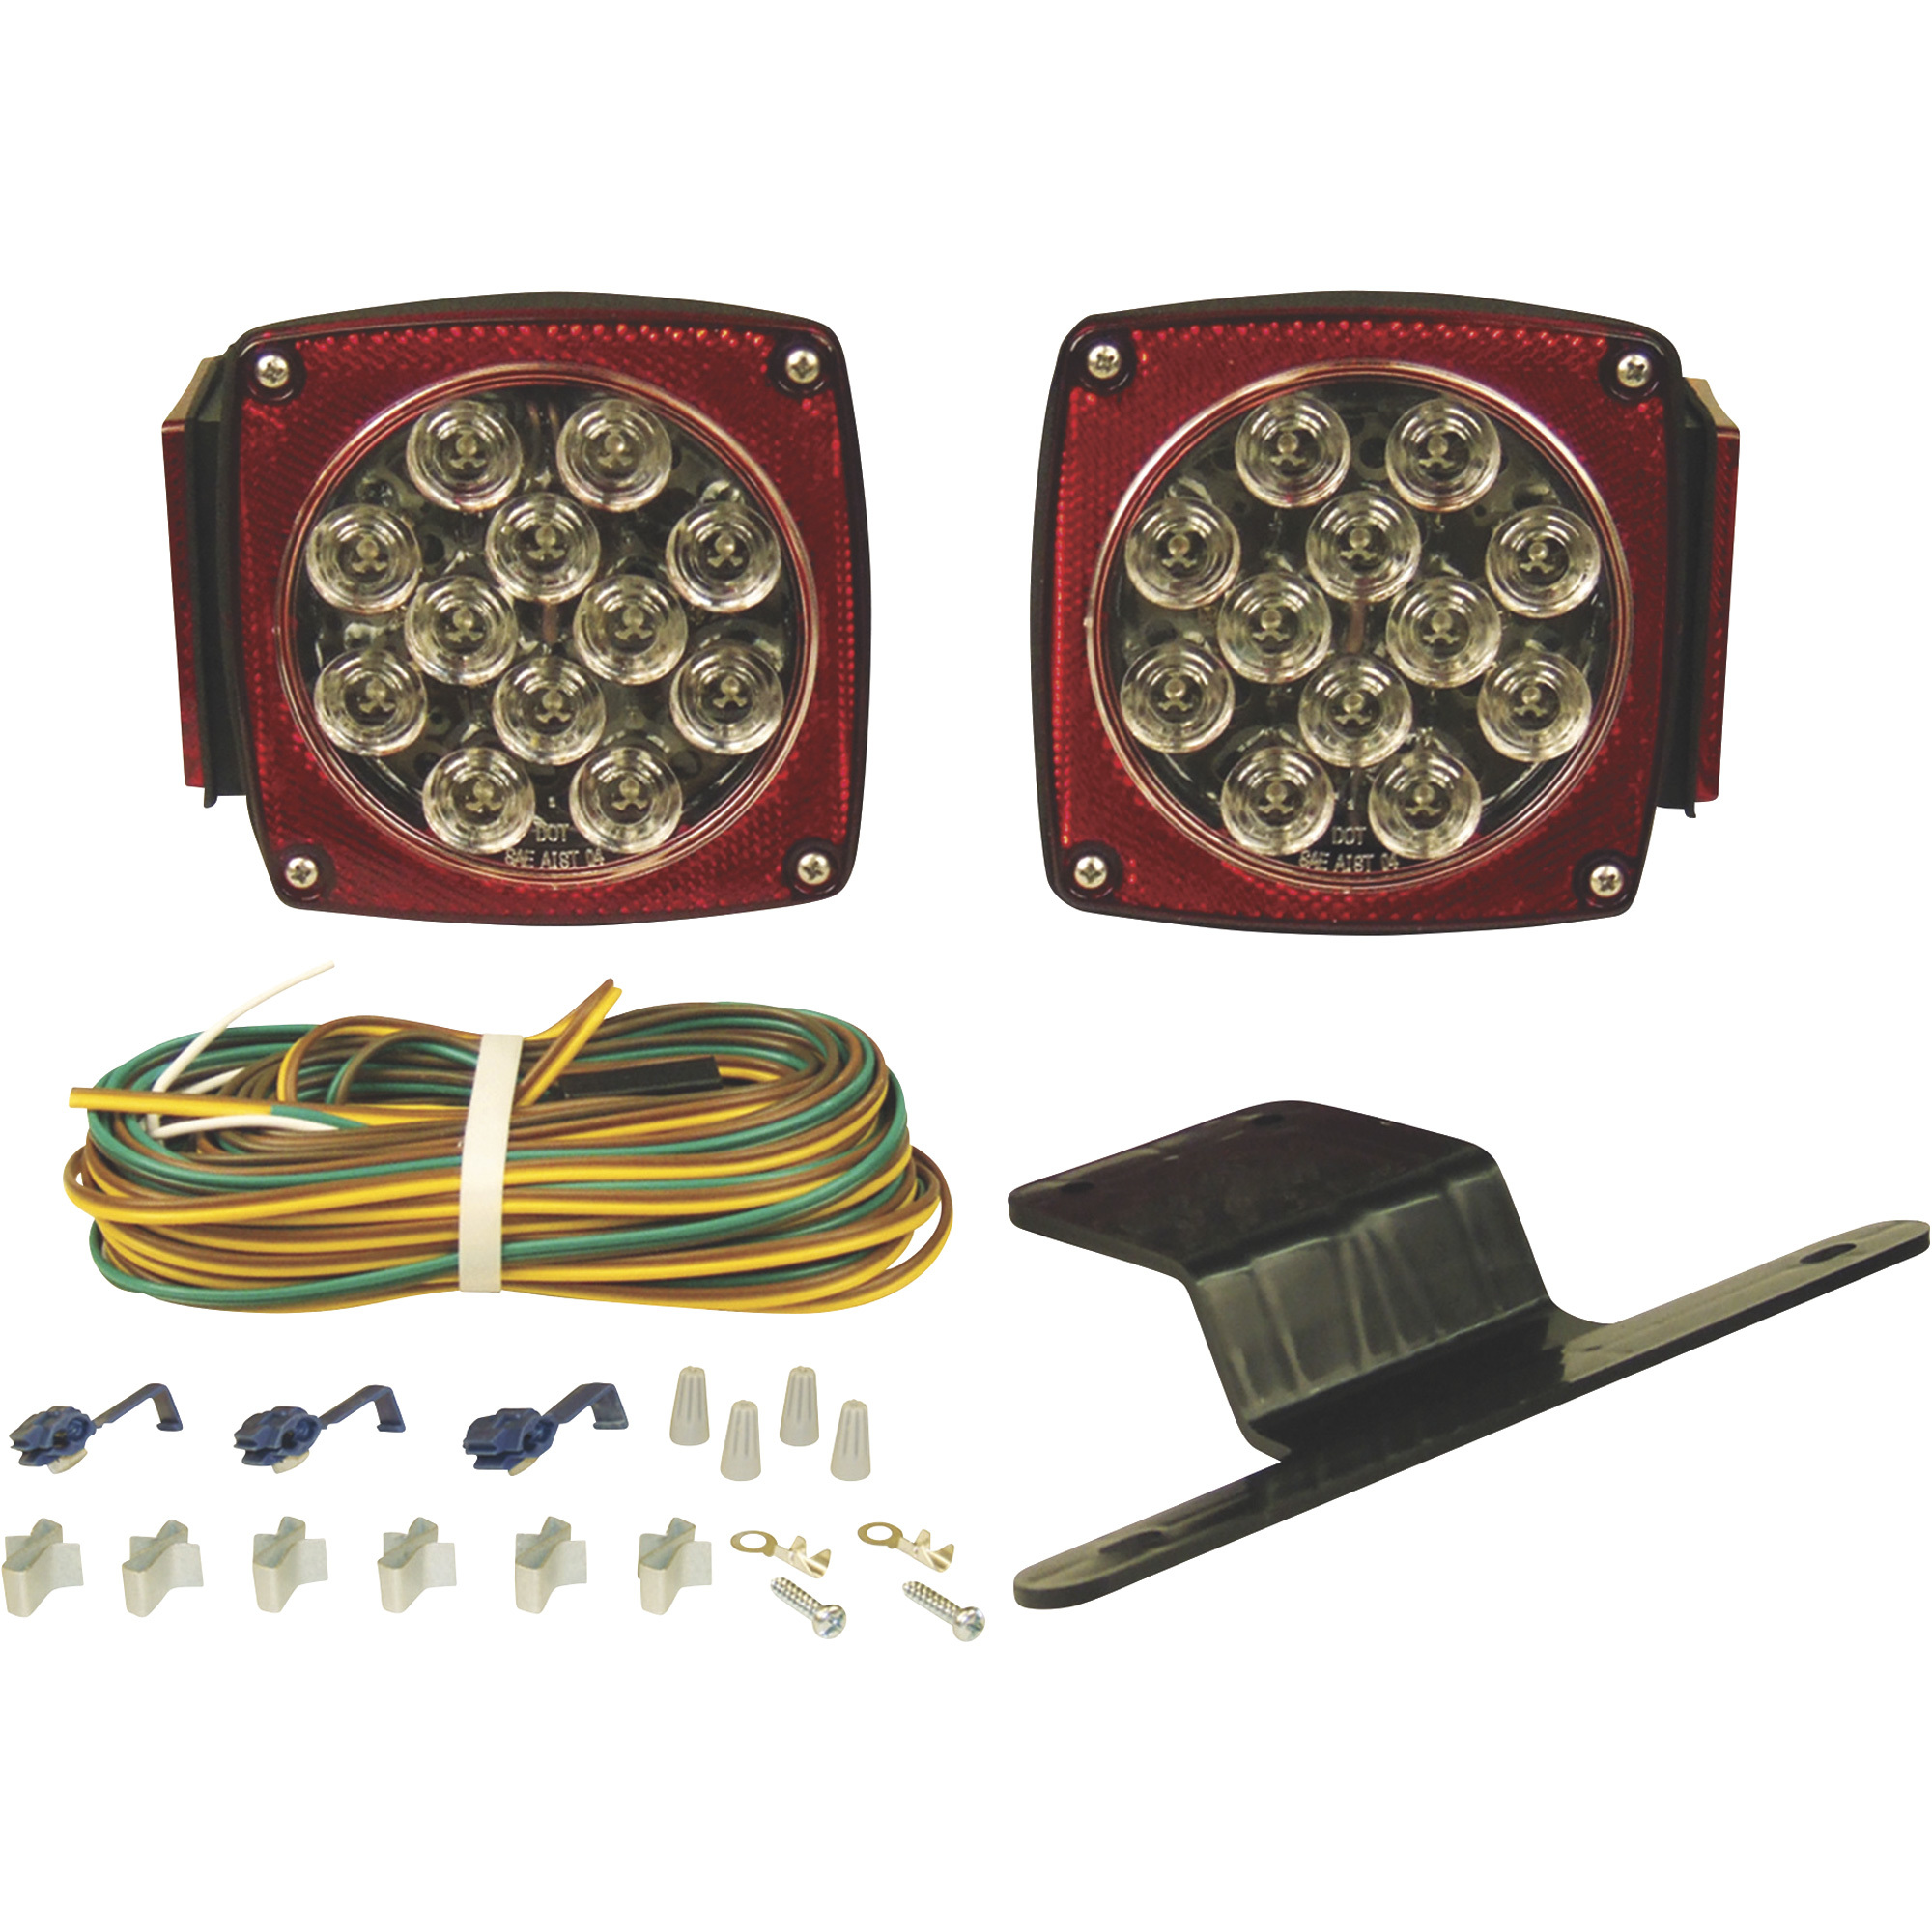 Hopkins Towing Solutions Submersible LED Trailer Light Kit â Clear Lens LEDs, Model C5721